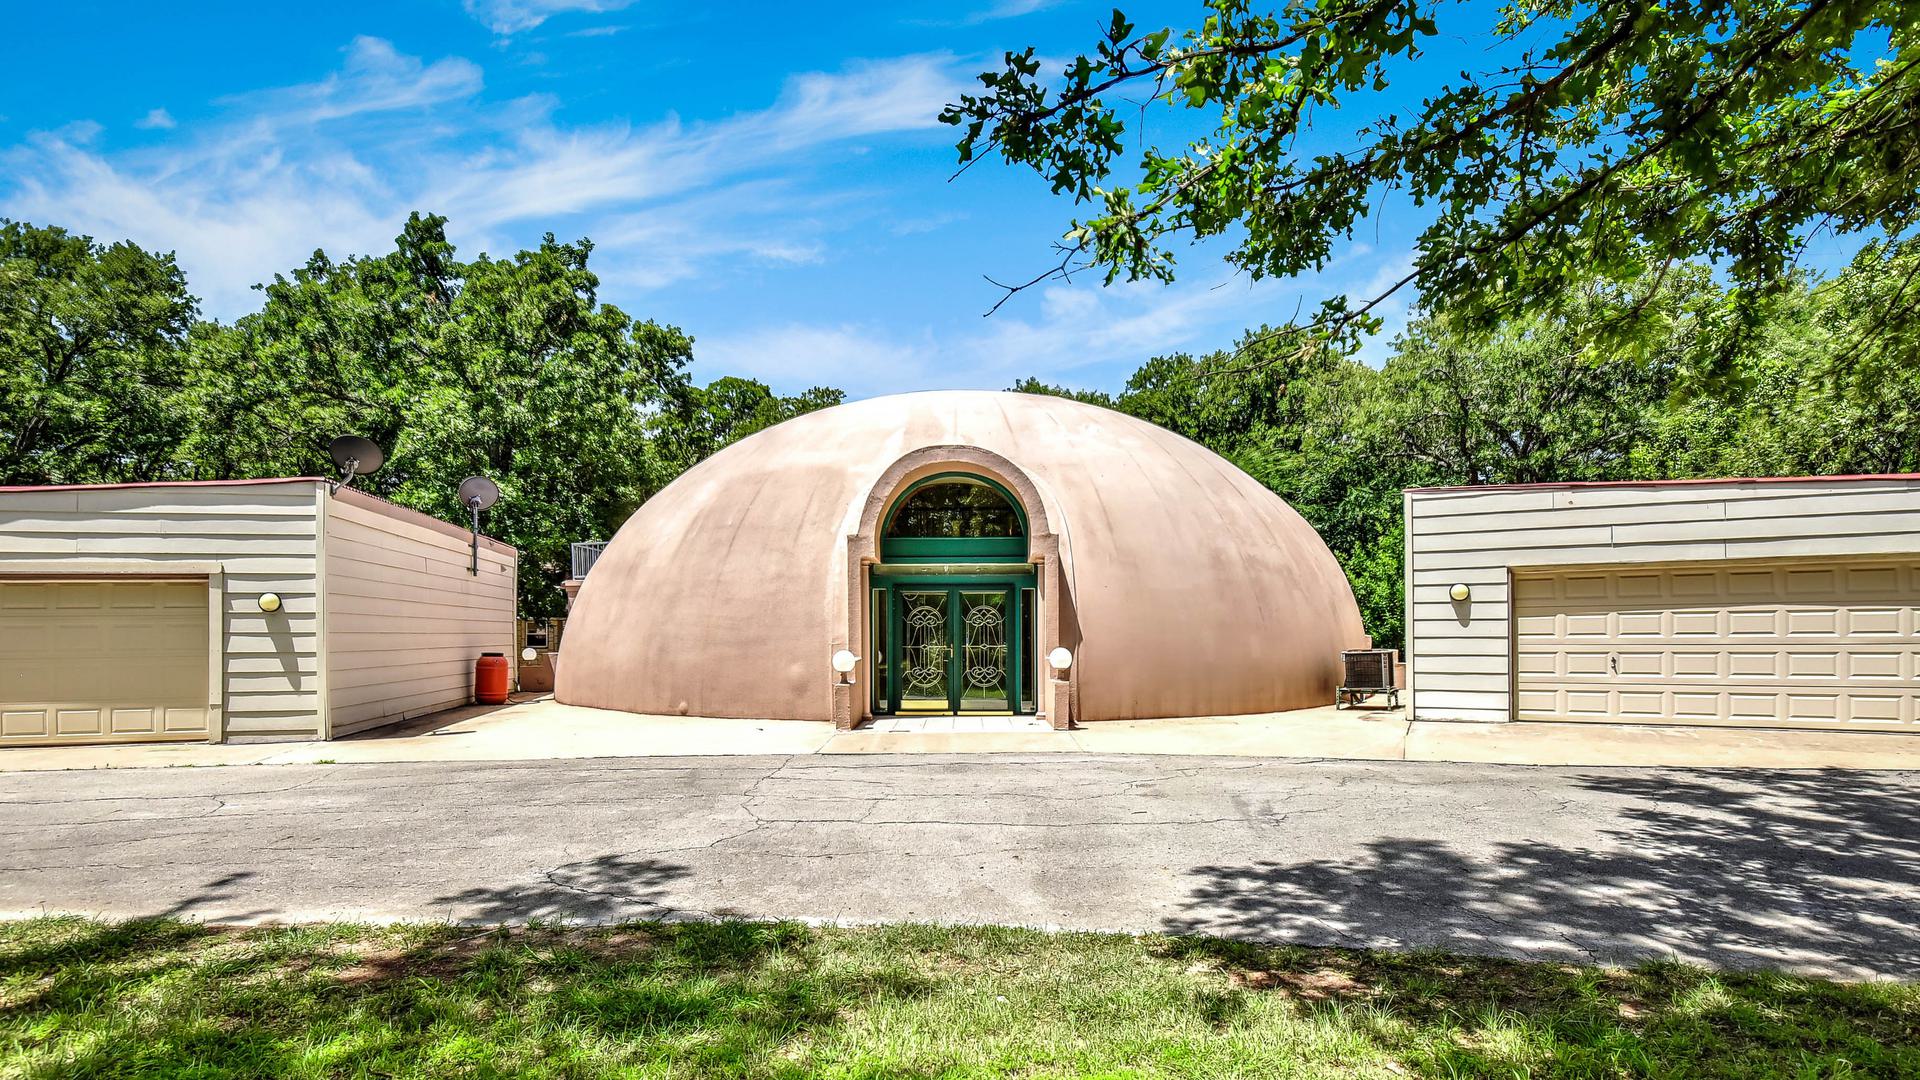 Exterior view of dome home and garages.